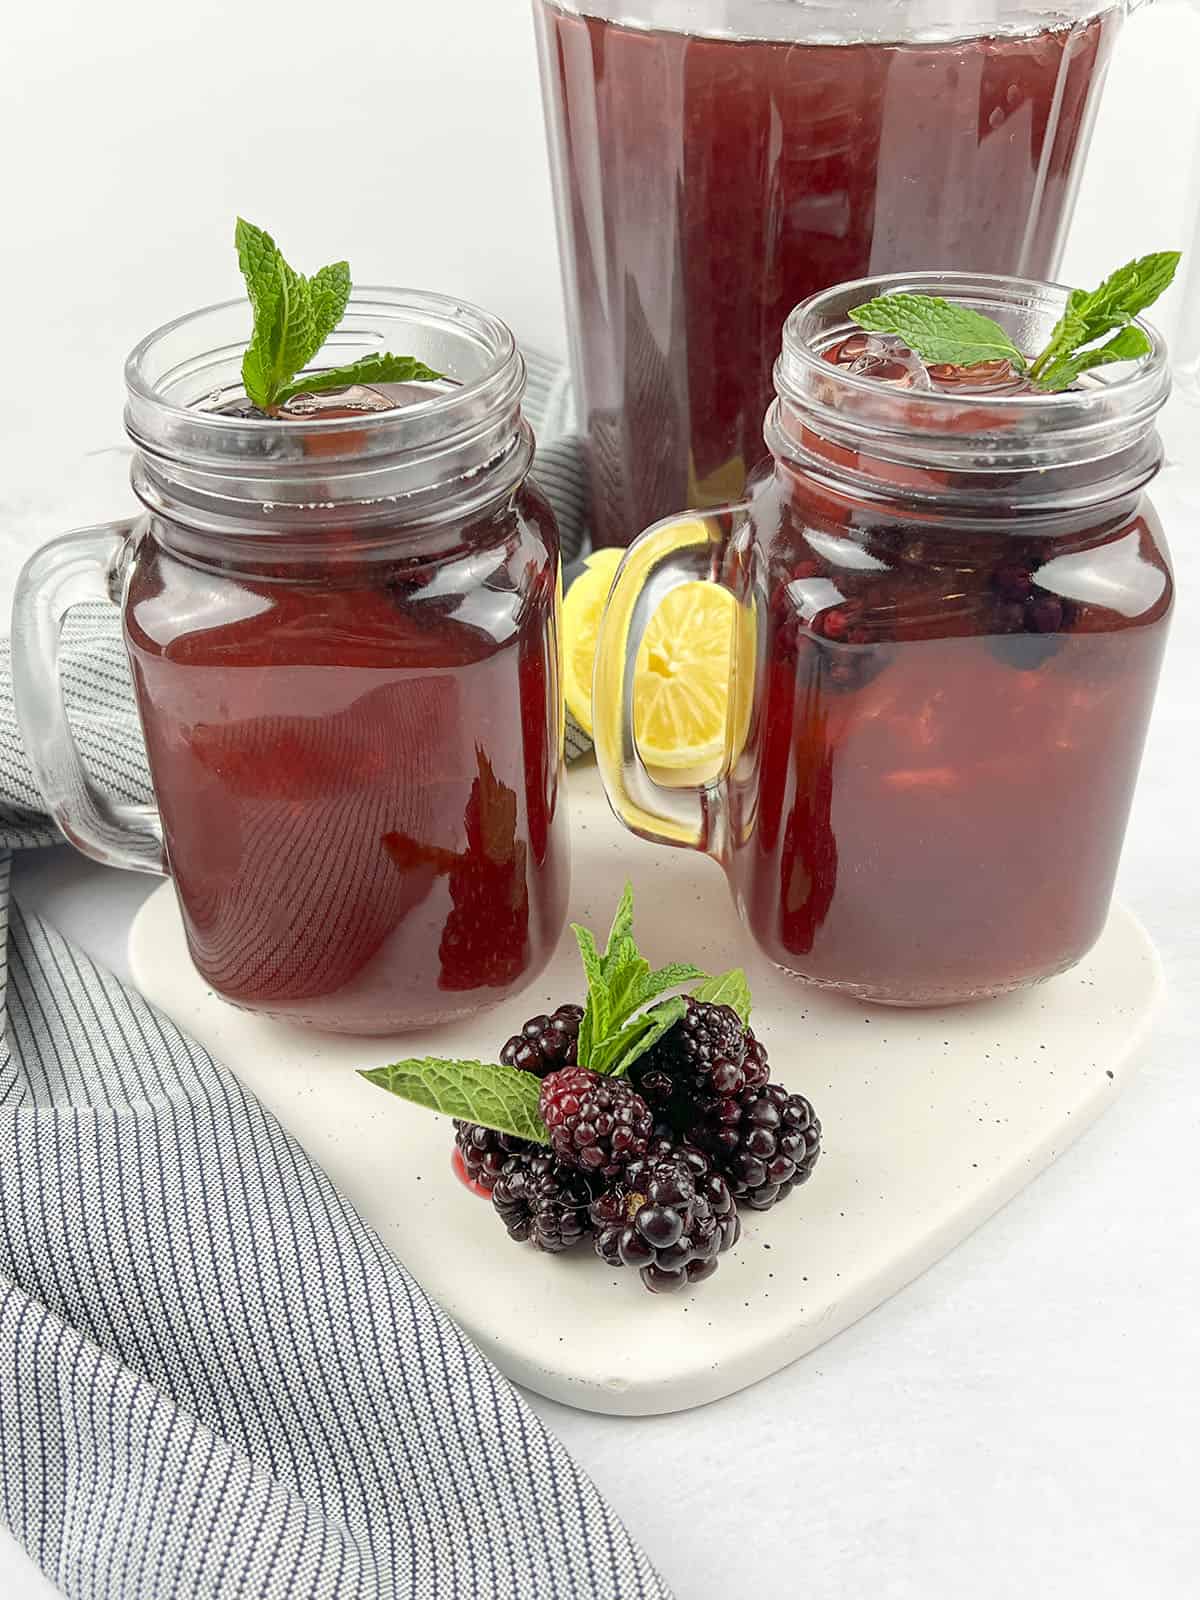 Two glasses and a pitcher of blackberry tea on a white cutting board.